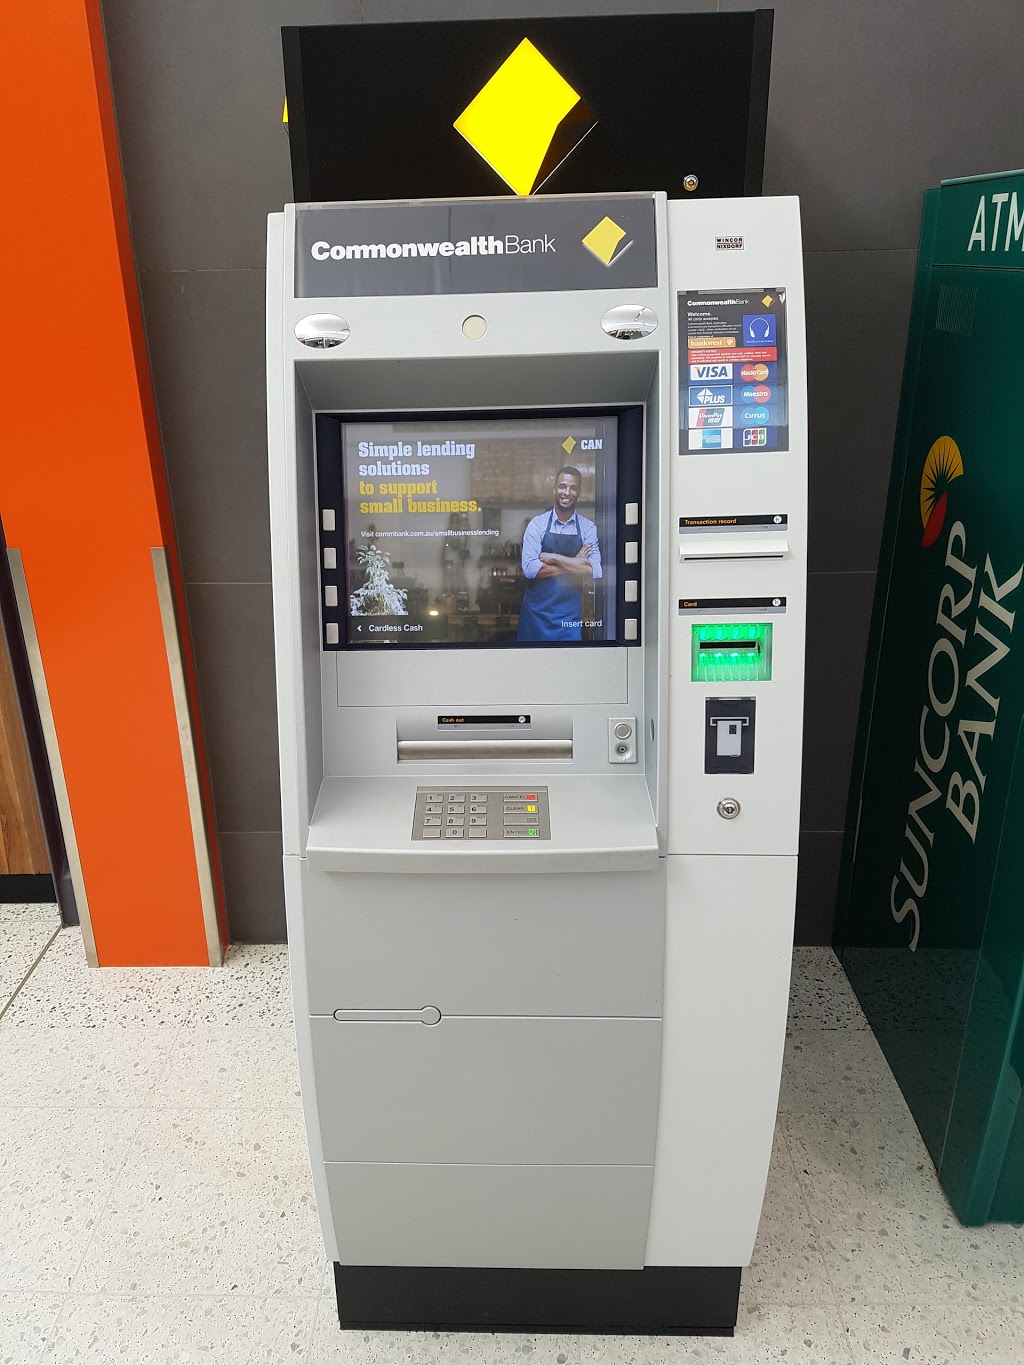 CBA ATM Meadowbrook | atm | Meadowbrook Shopping Centre, 226-242 Loganlea Rd, Meadowbrook QLD 4131, Australia | 132221 OR +61 132221